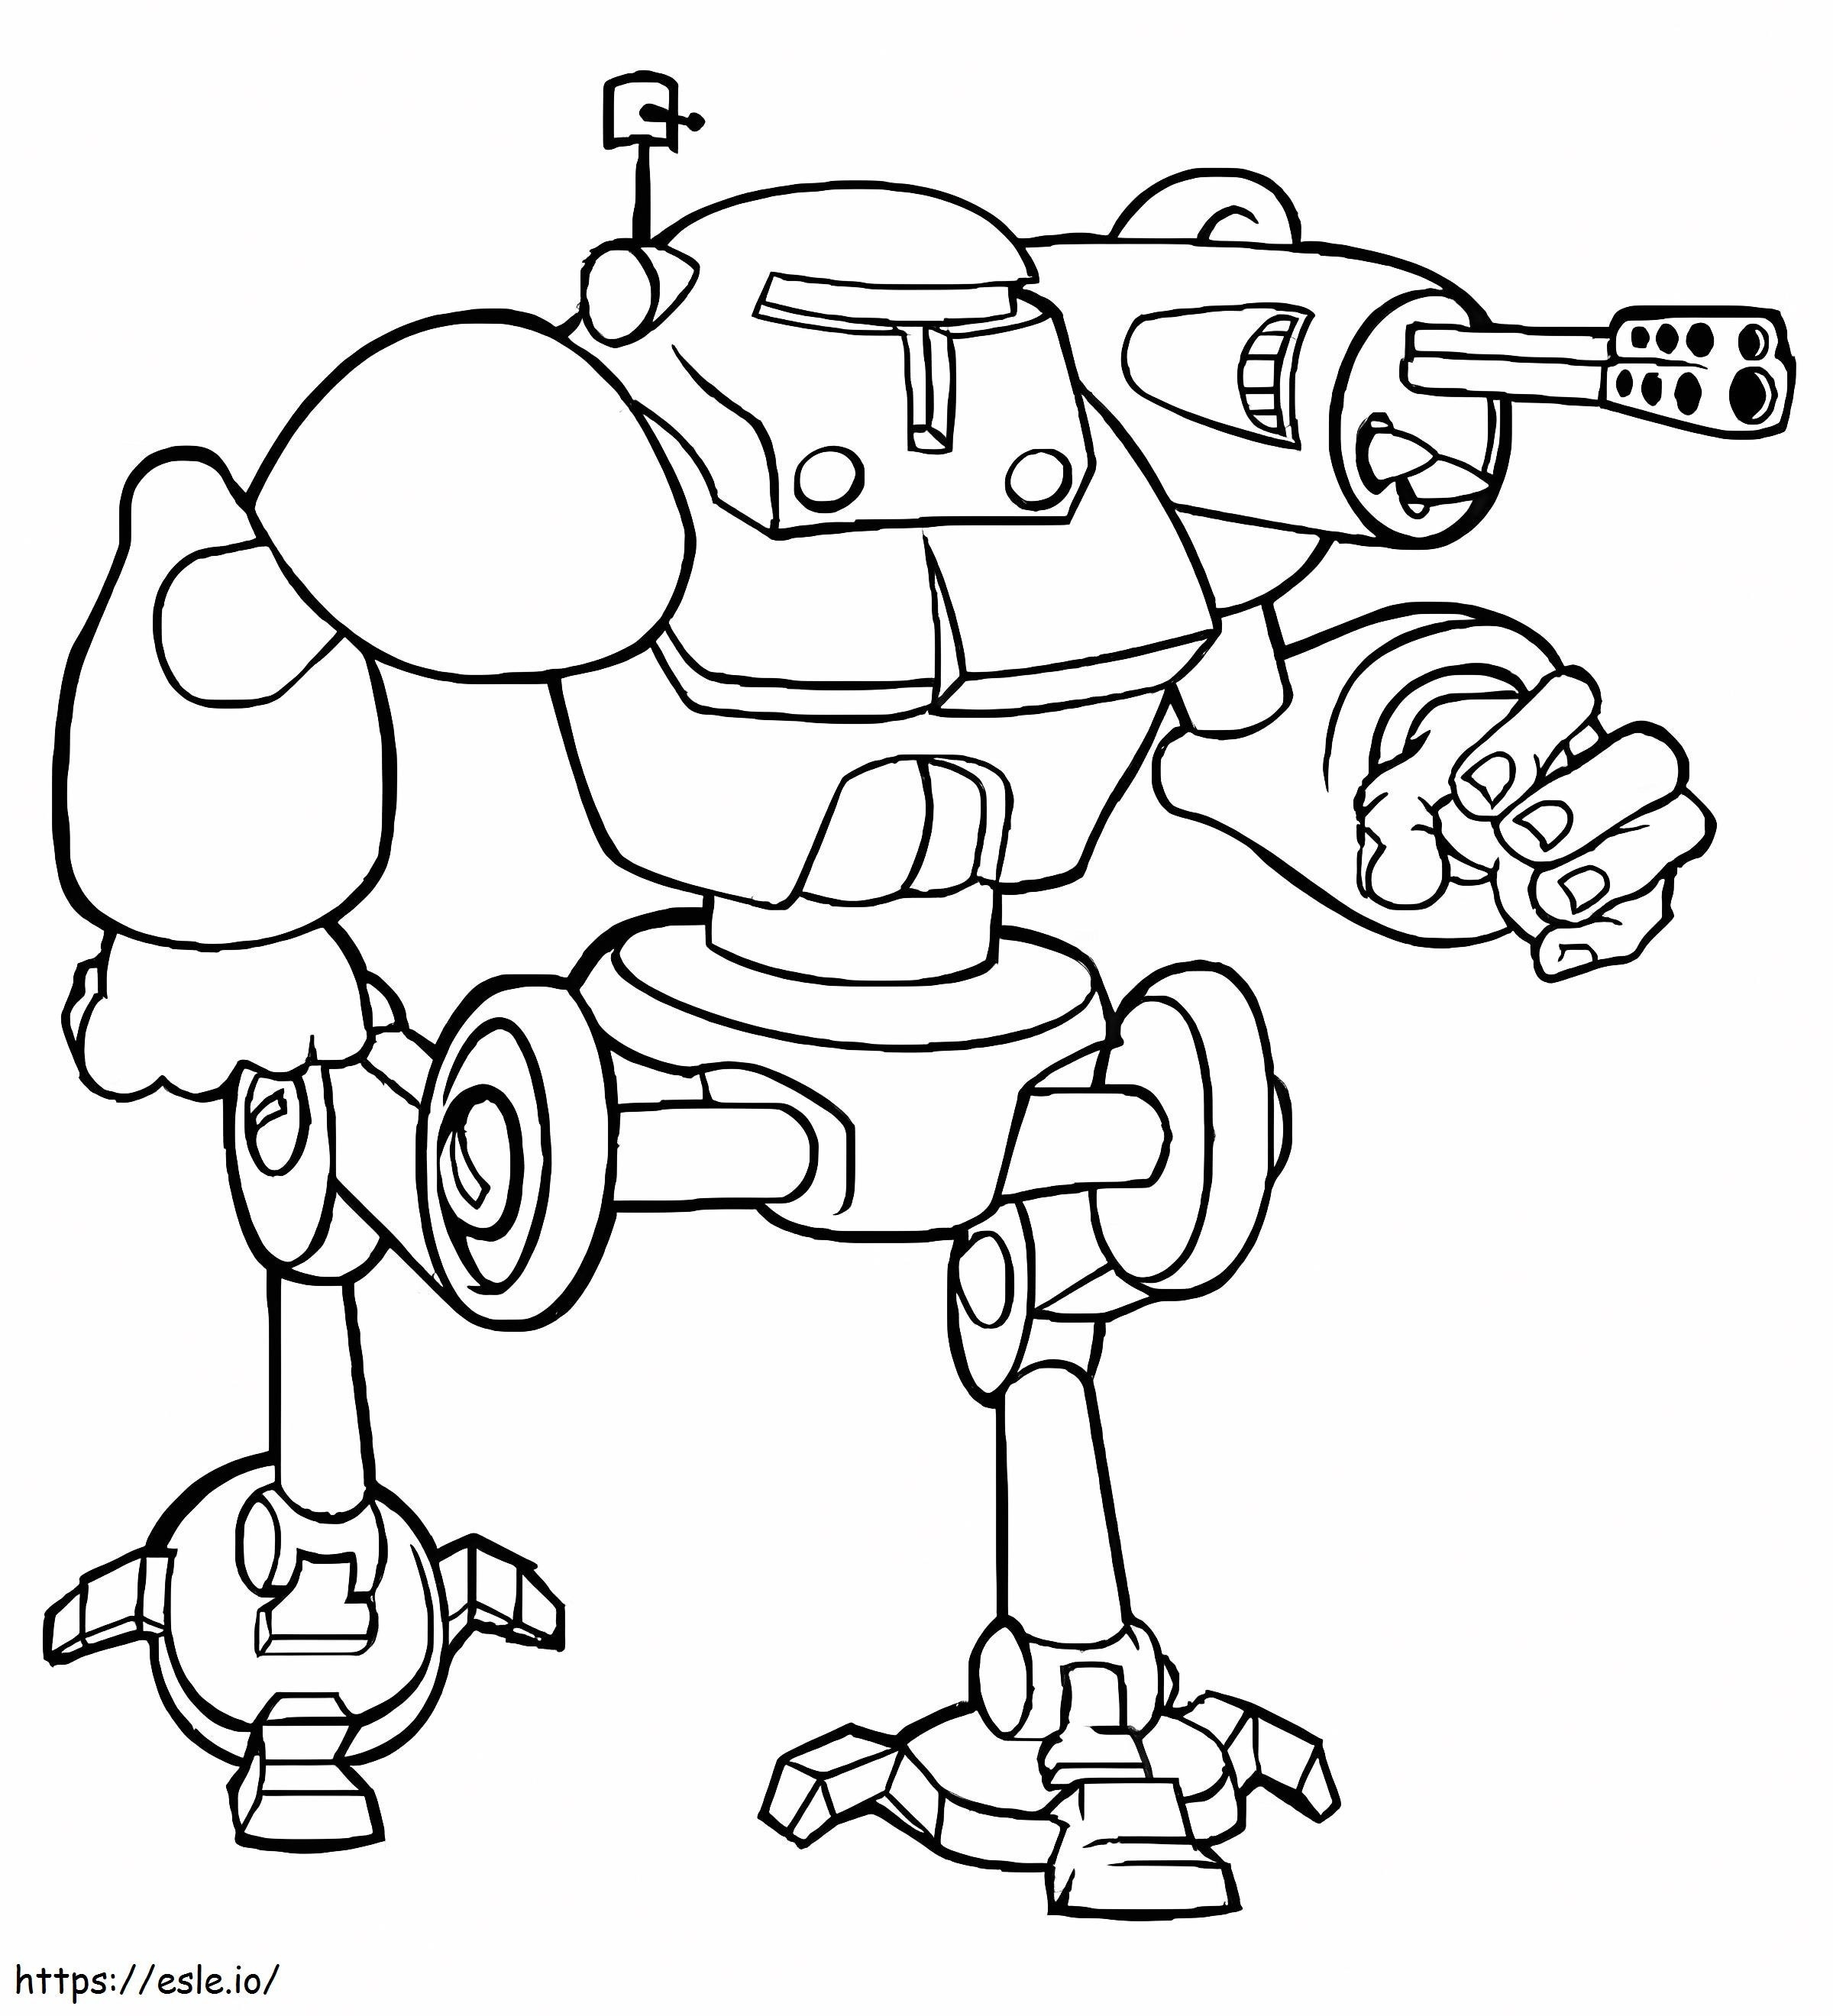 Robot With Machine Gun coloring page